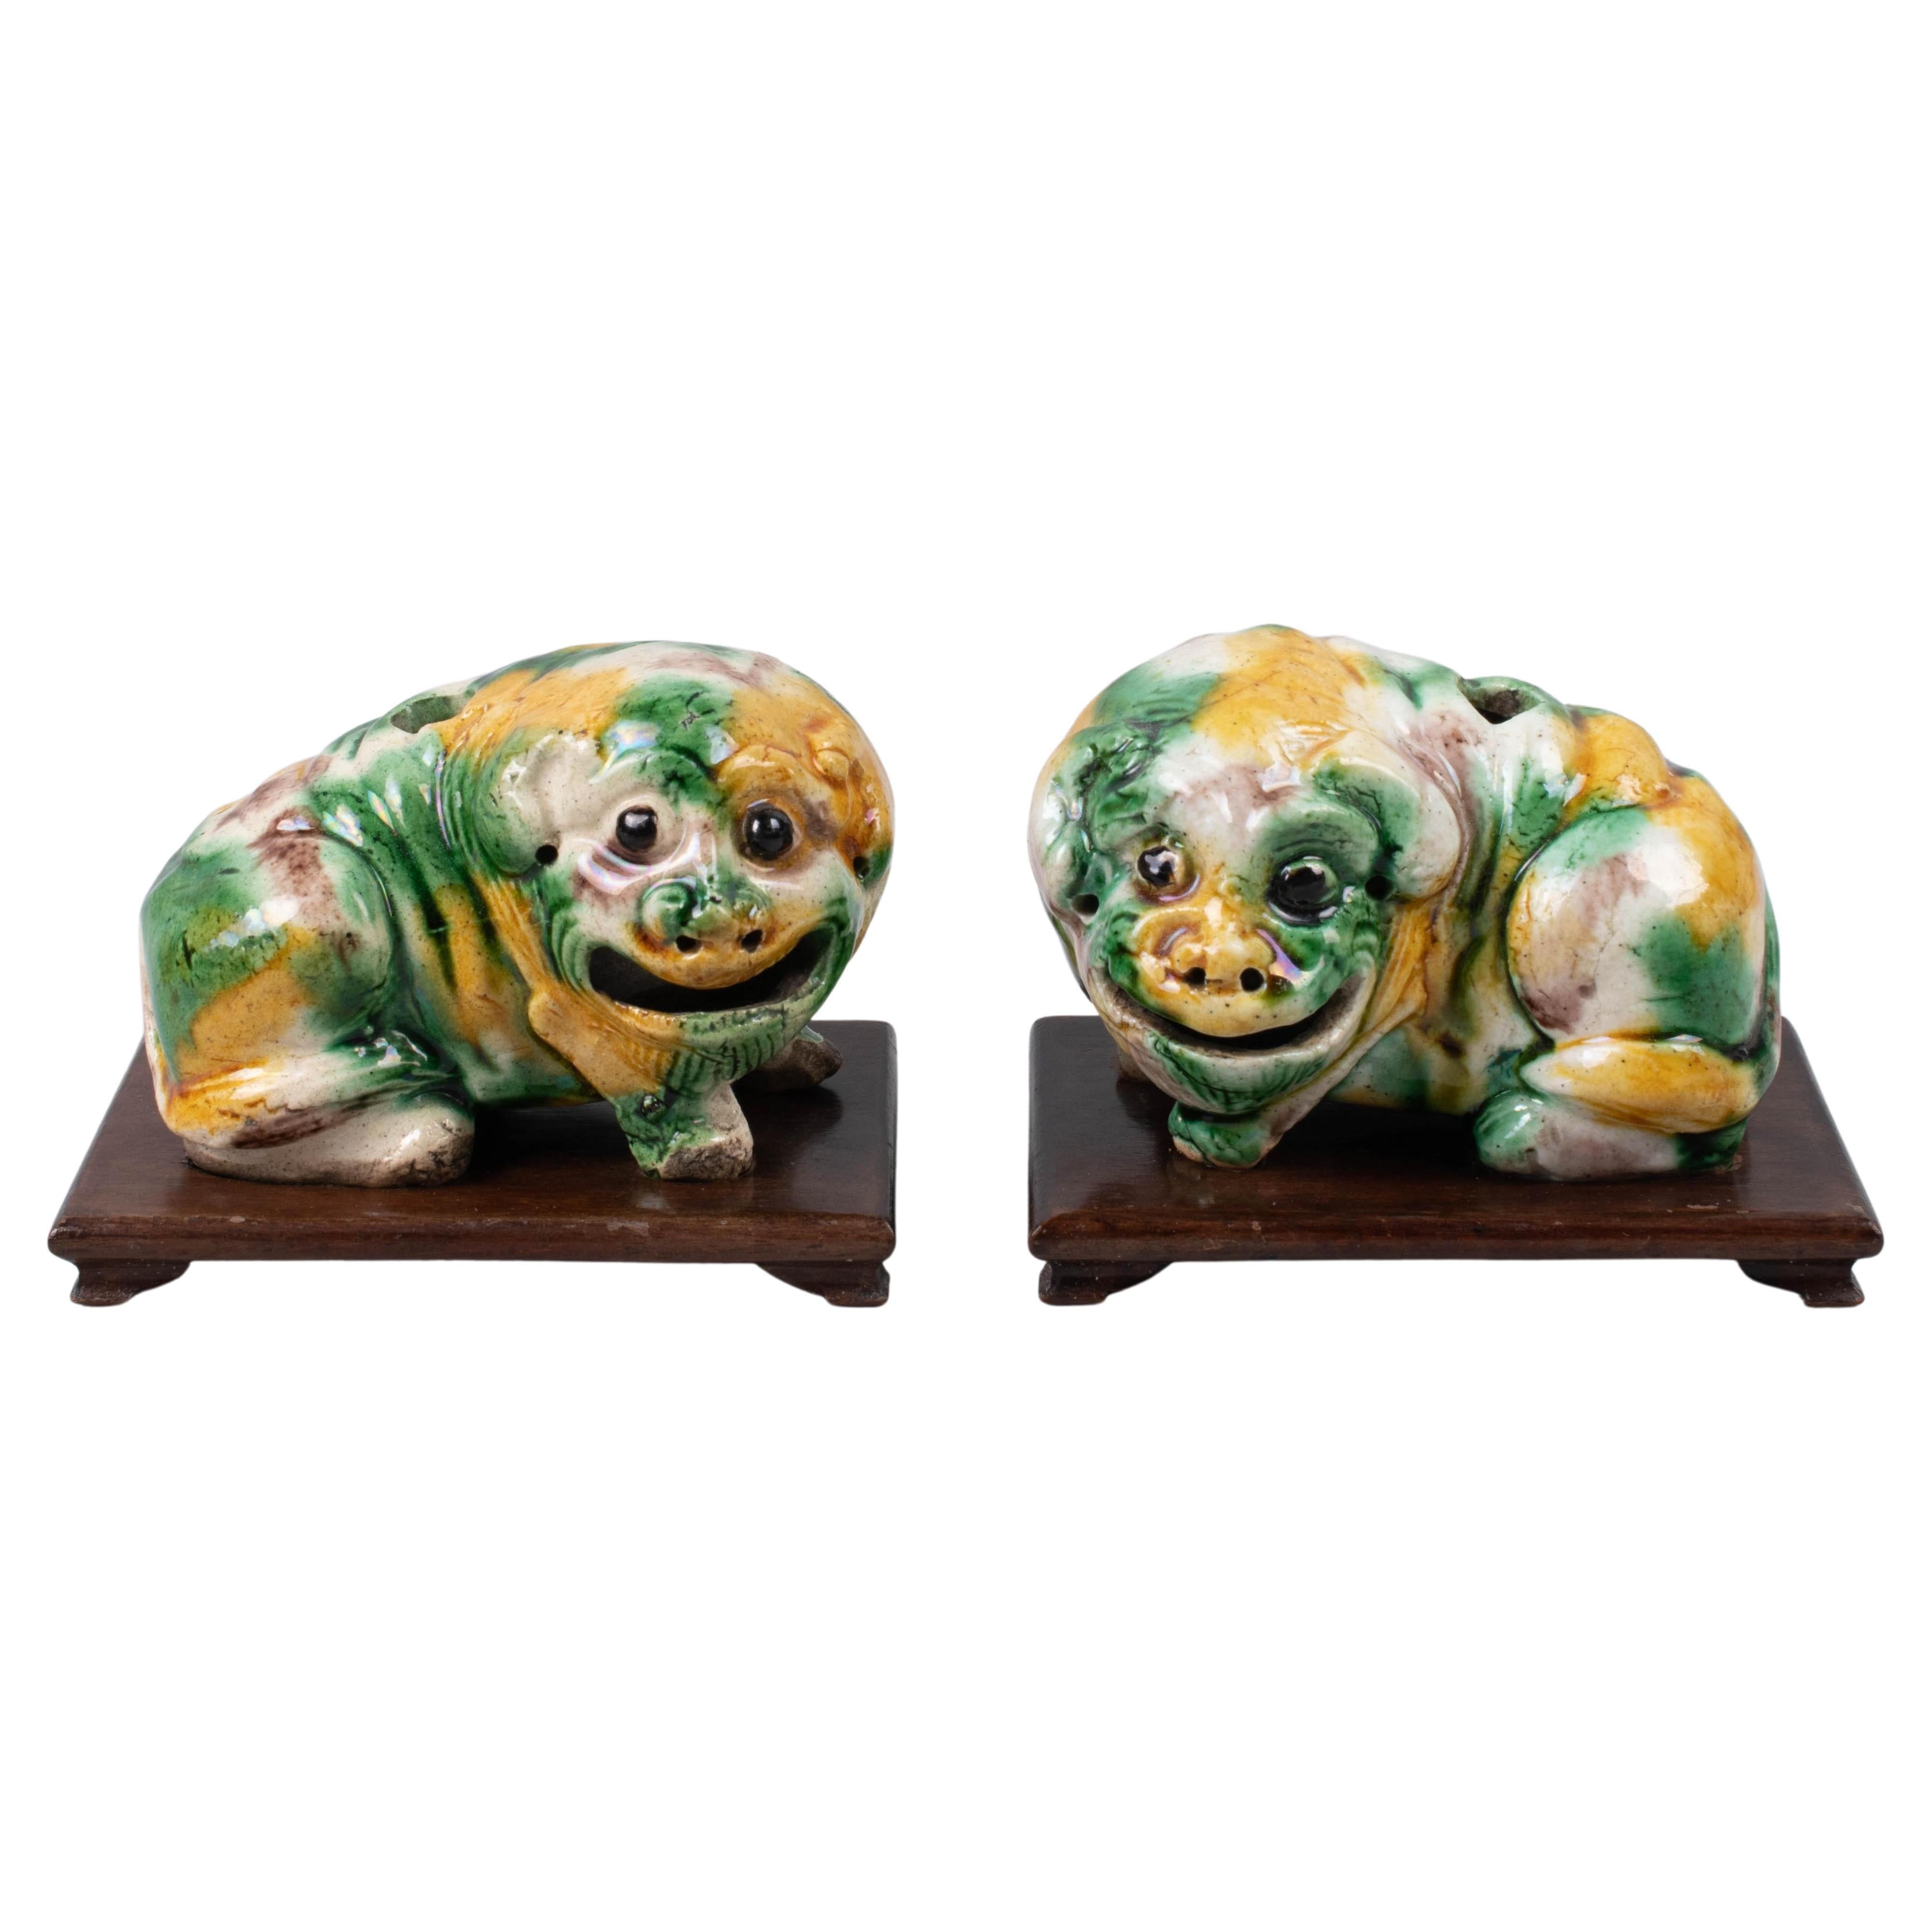 This pair of small Chinese Shar Pei puppies was made in the mid-19th century, circa 1860.                
They are charming creatures with adorable faces. 
They are decorated with traditional Sancai three-color yellow, purple, and green glazes.